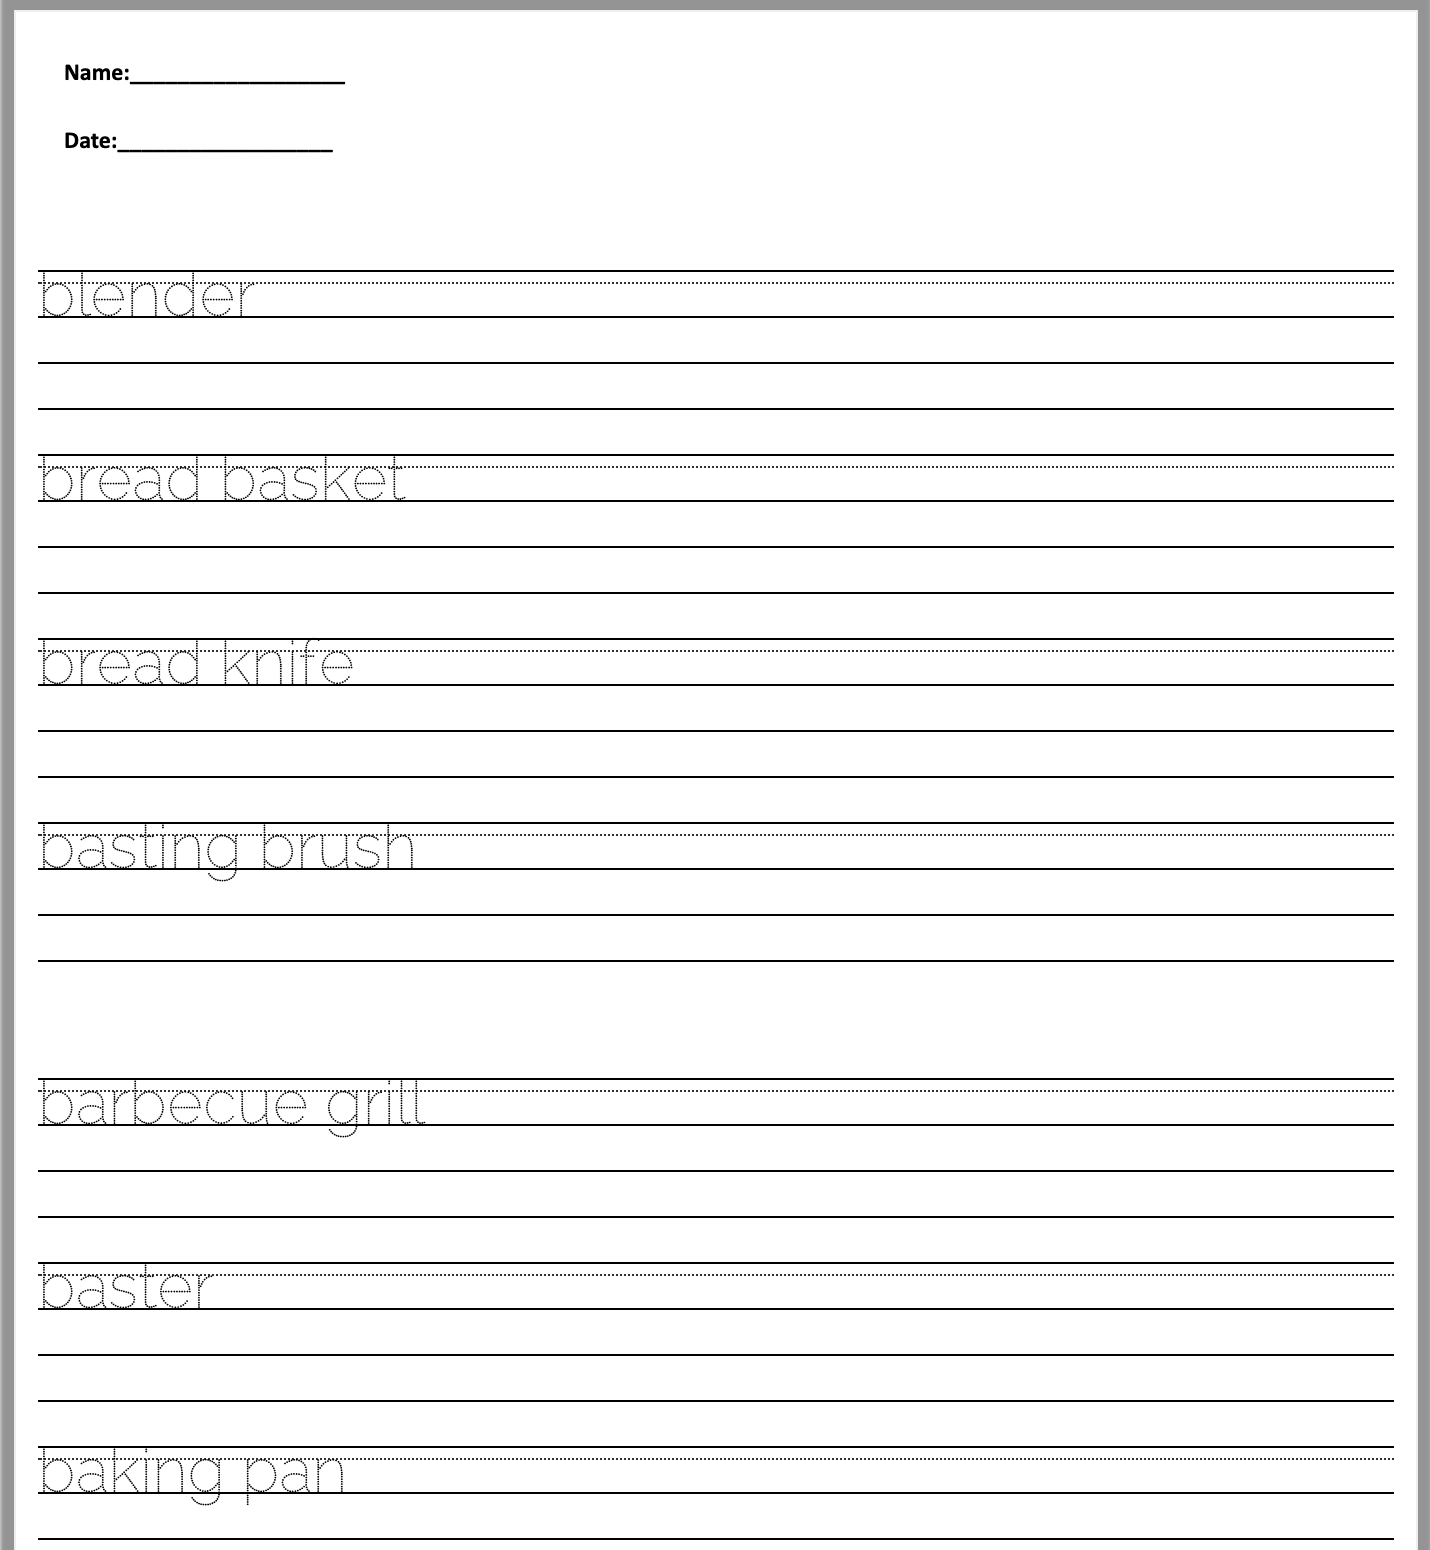 free-english-worksheet-generators-for-teachers-and-parents